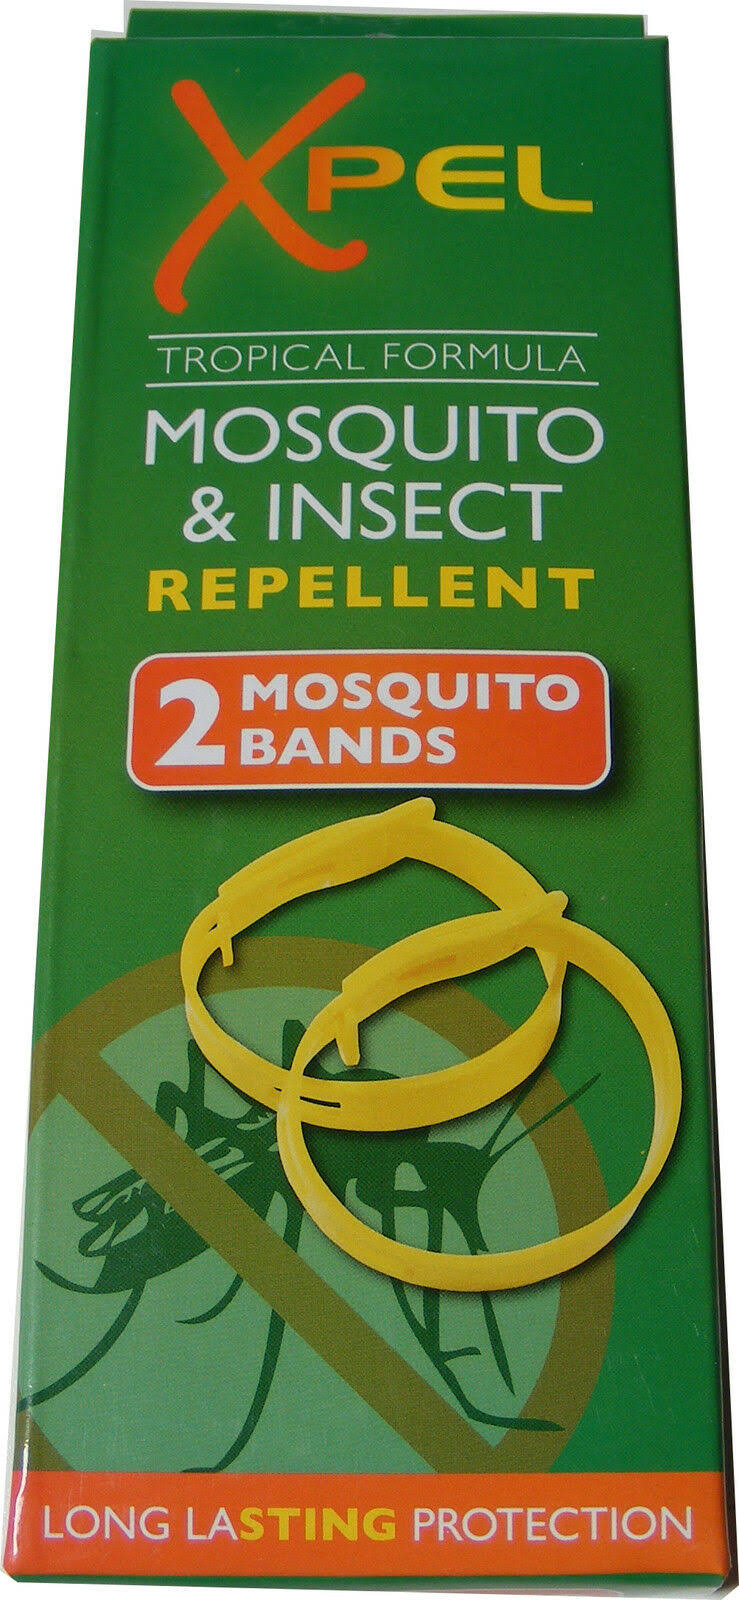 Xpel Mosquito Insect Repellent